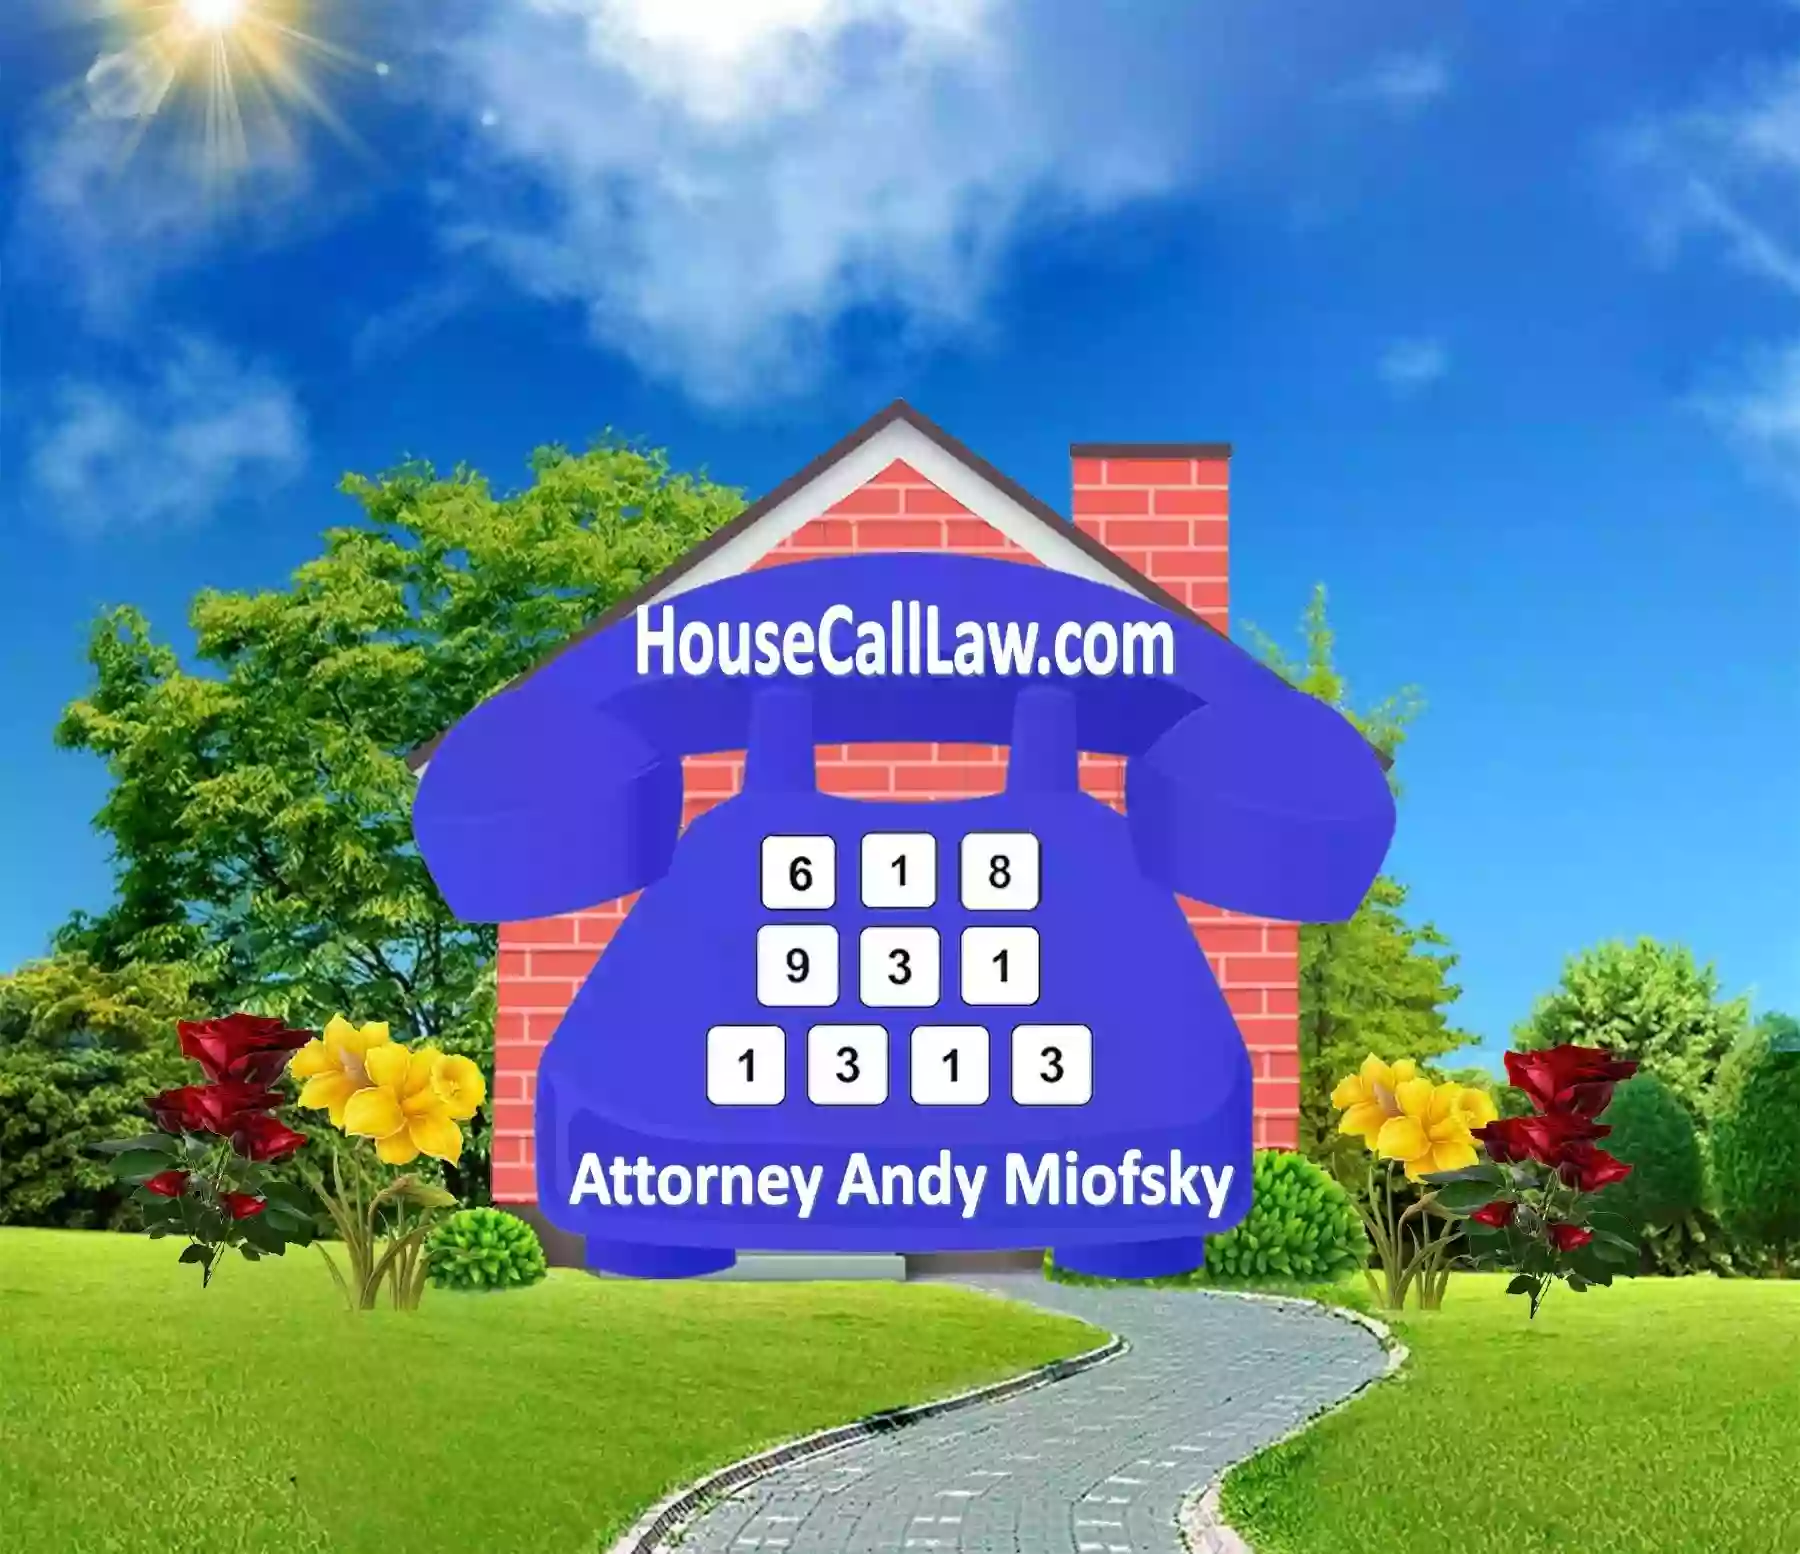 HouseCallLaw.com featuring A Bankruptcy Lawyer Andy Miofsky